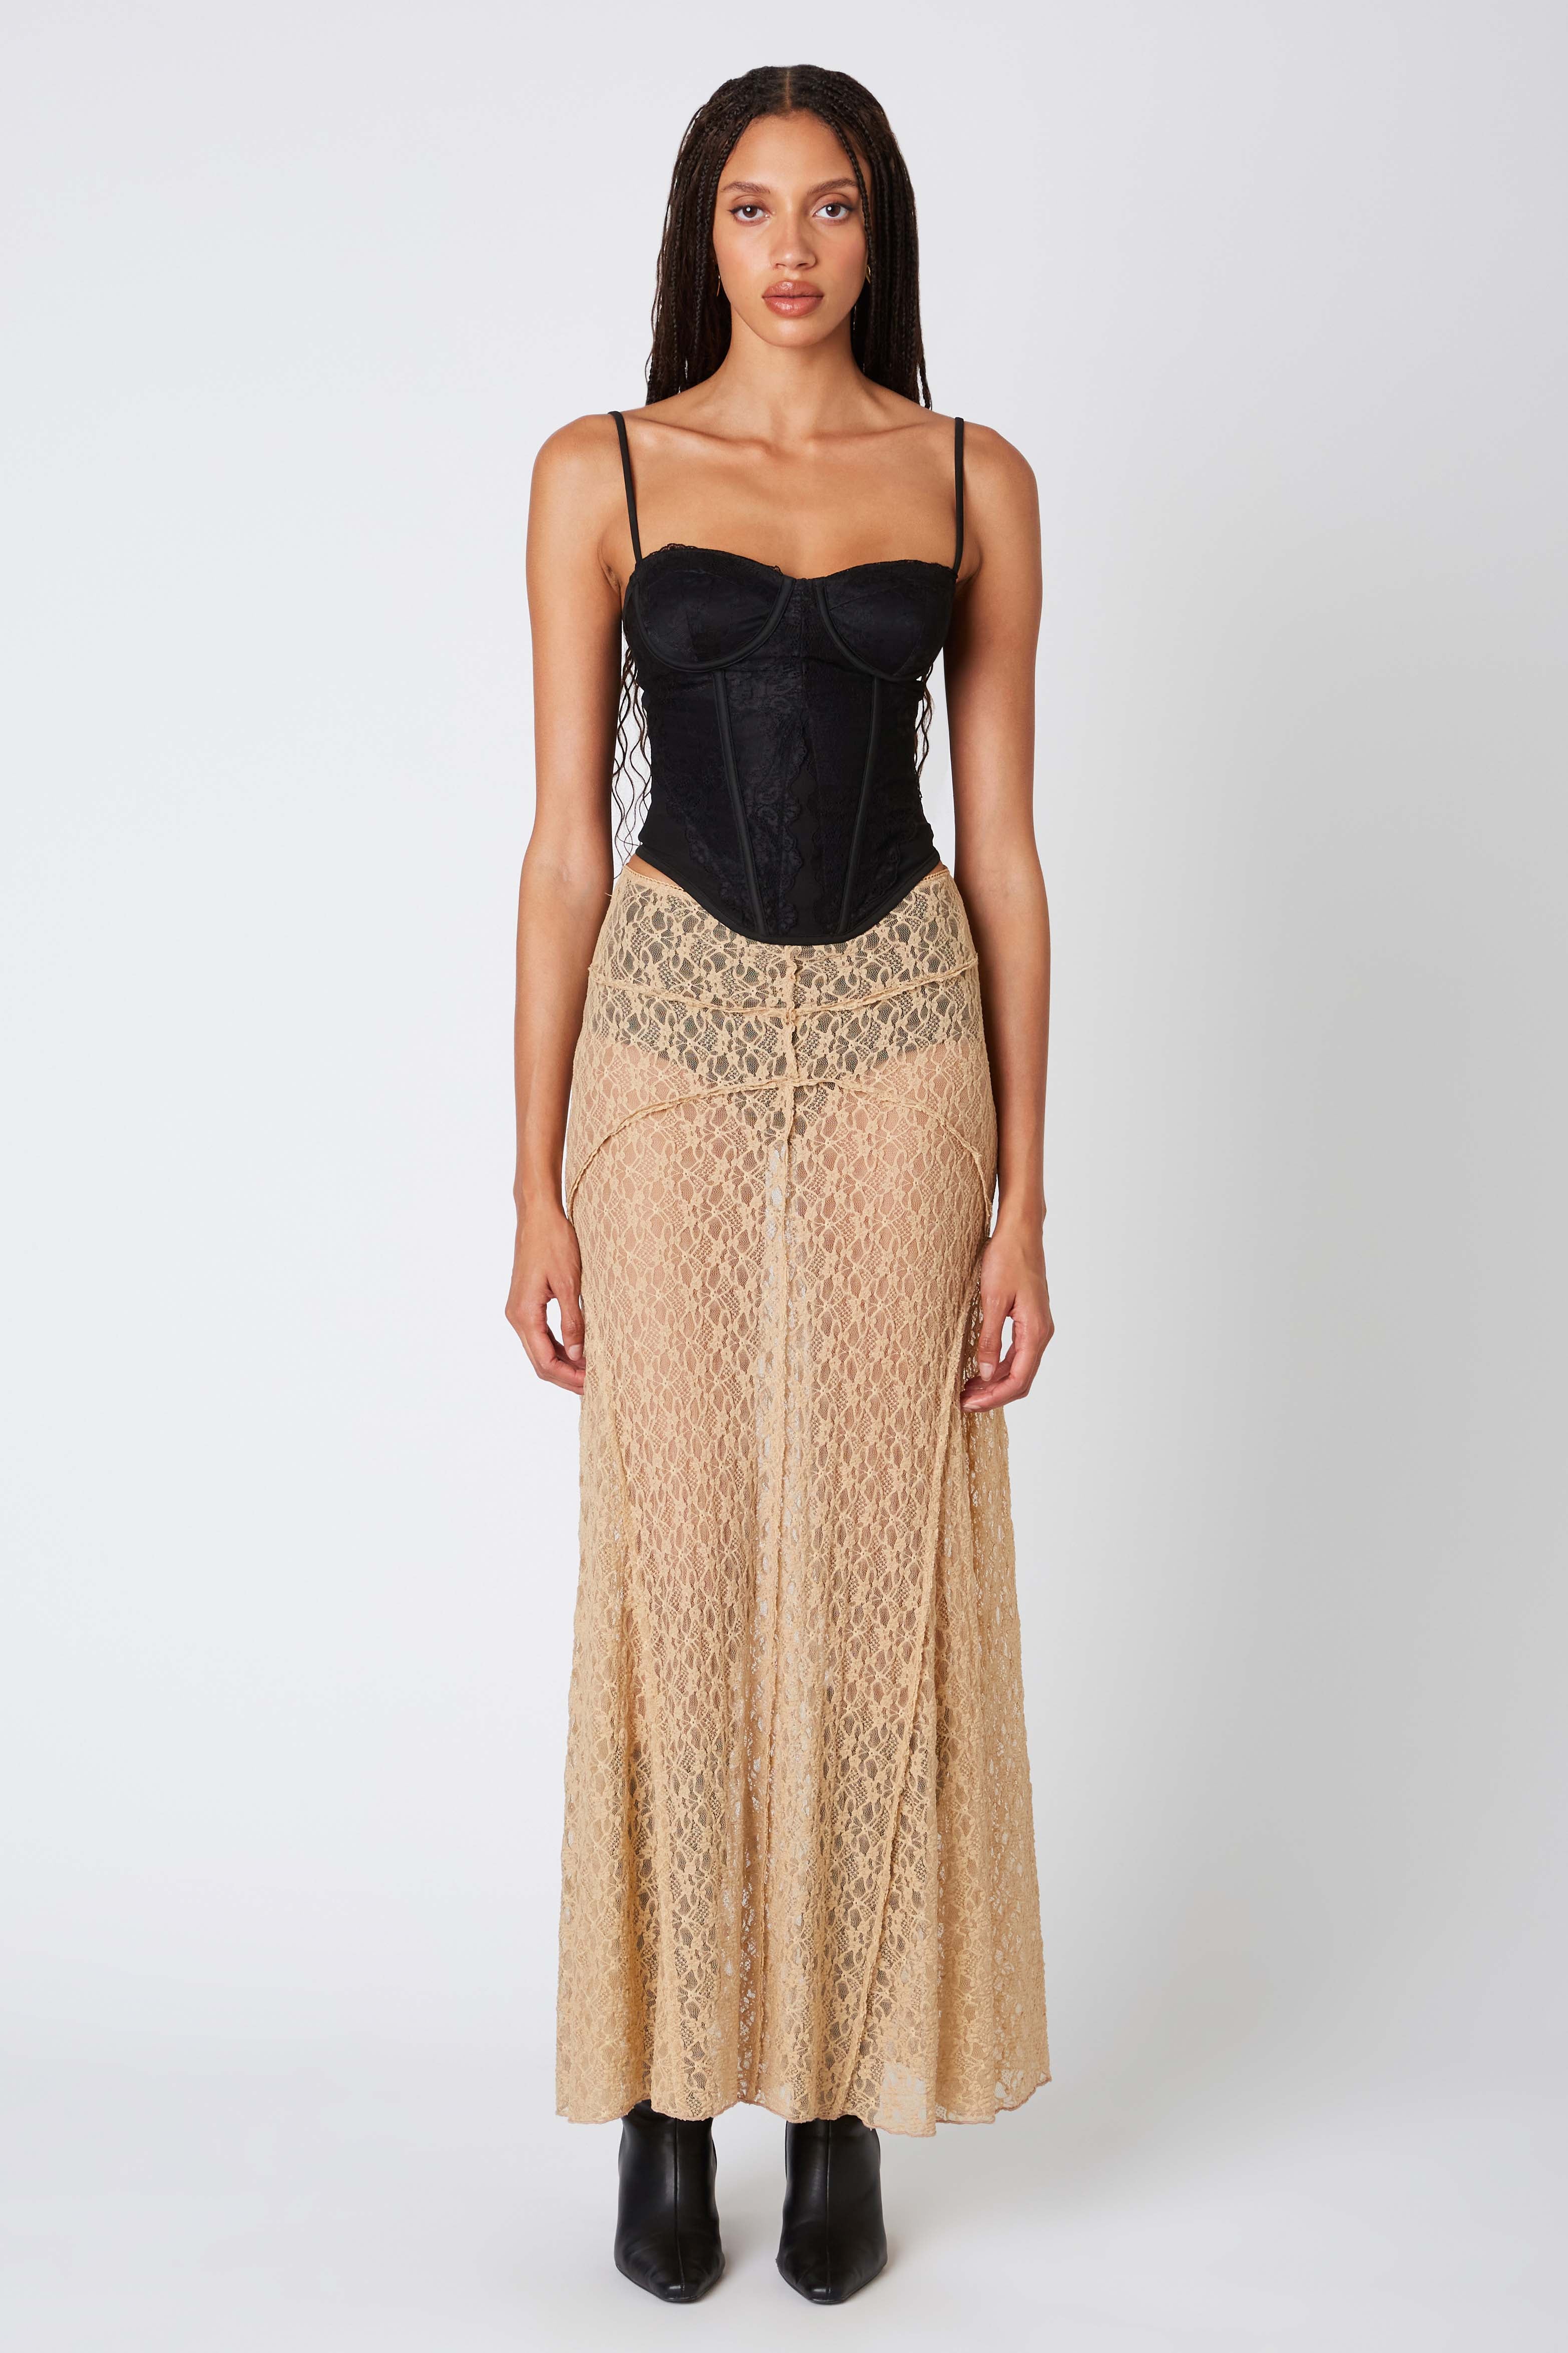 Sheer Lace Maxi Skirt in Tan Front View